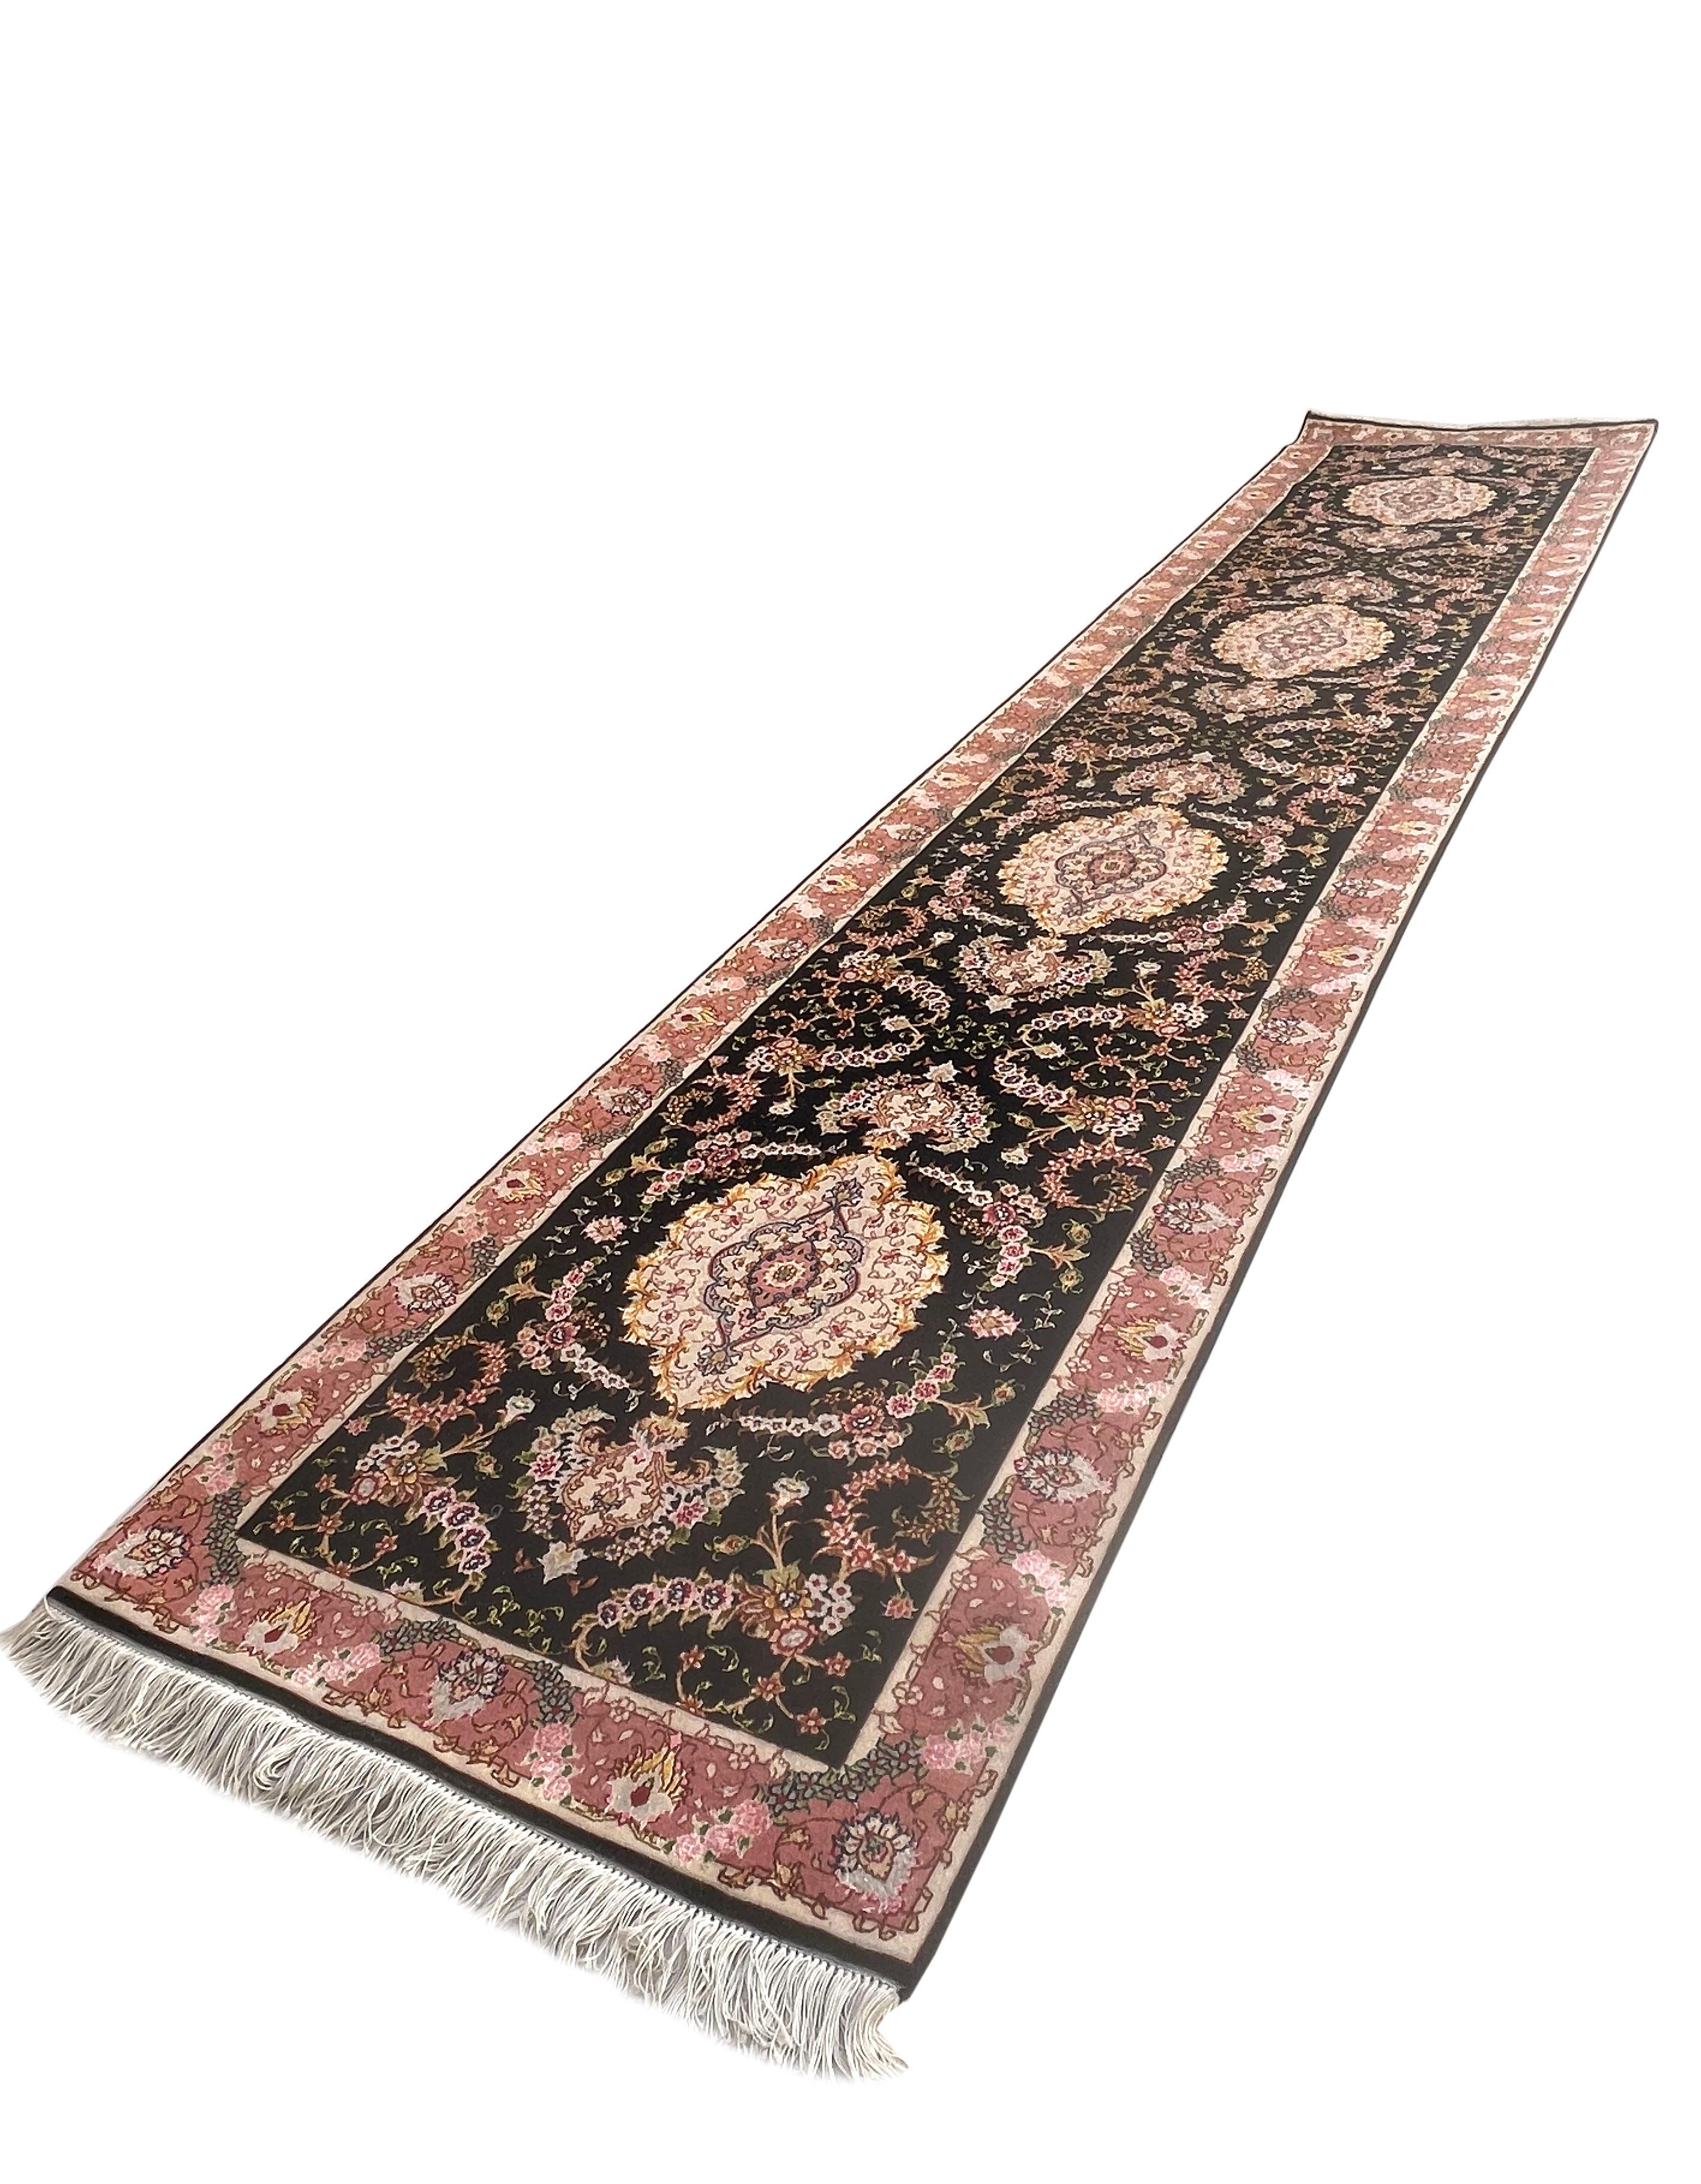 Authentic Persian Hand Knotted Repeated Medallion Floral Tabriz Black Runner Rug For Sale 3